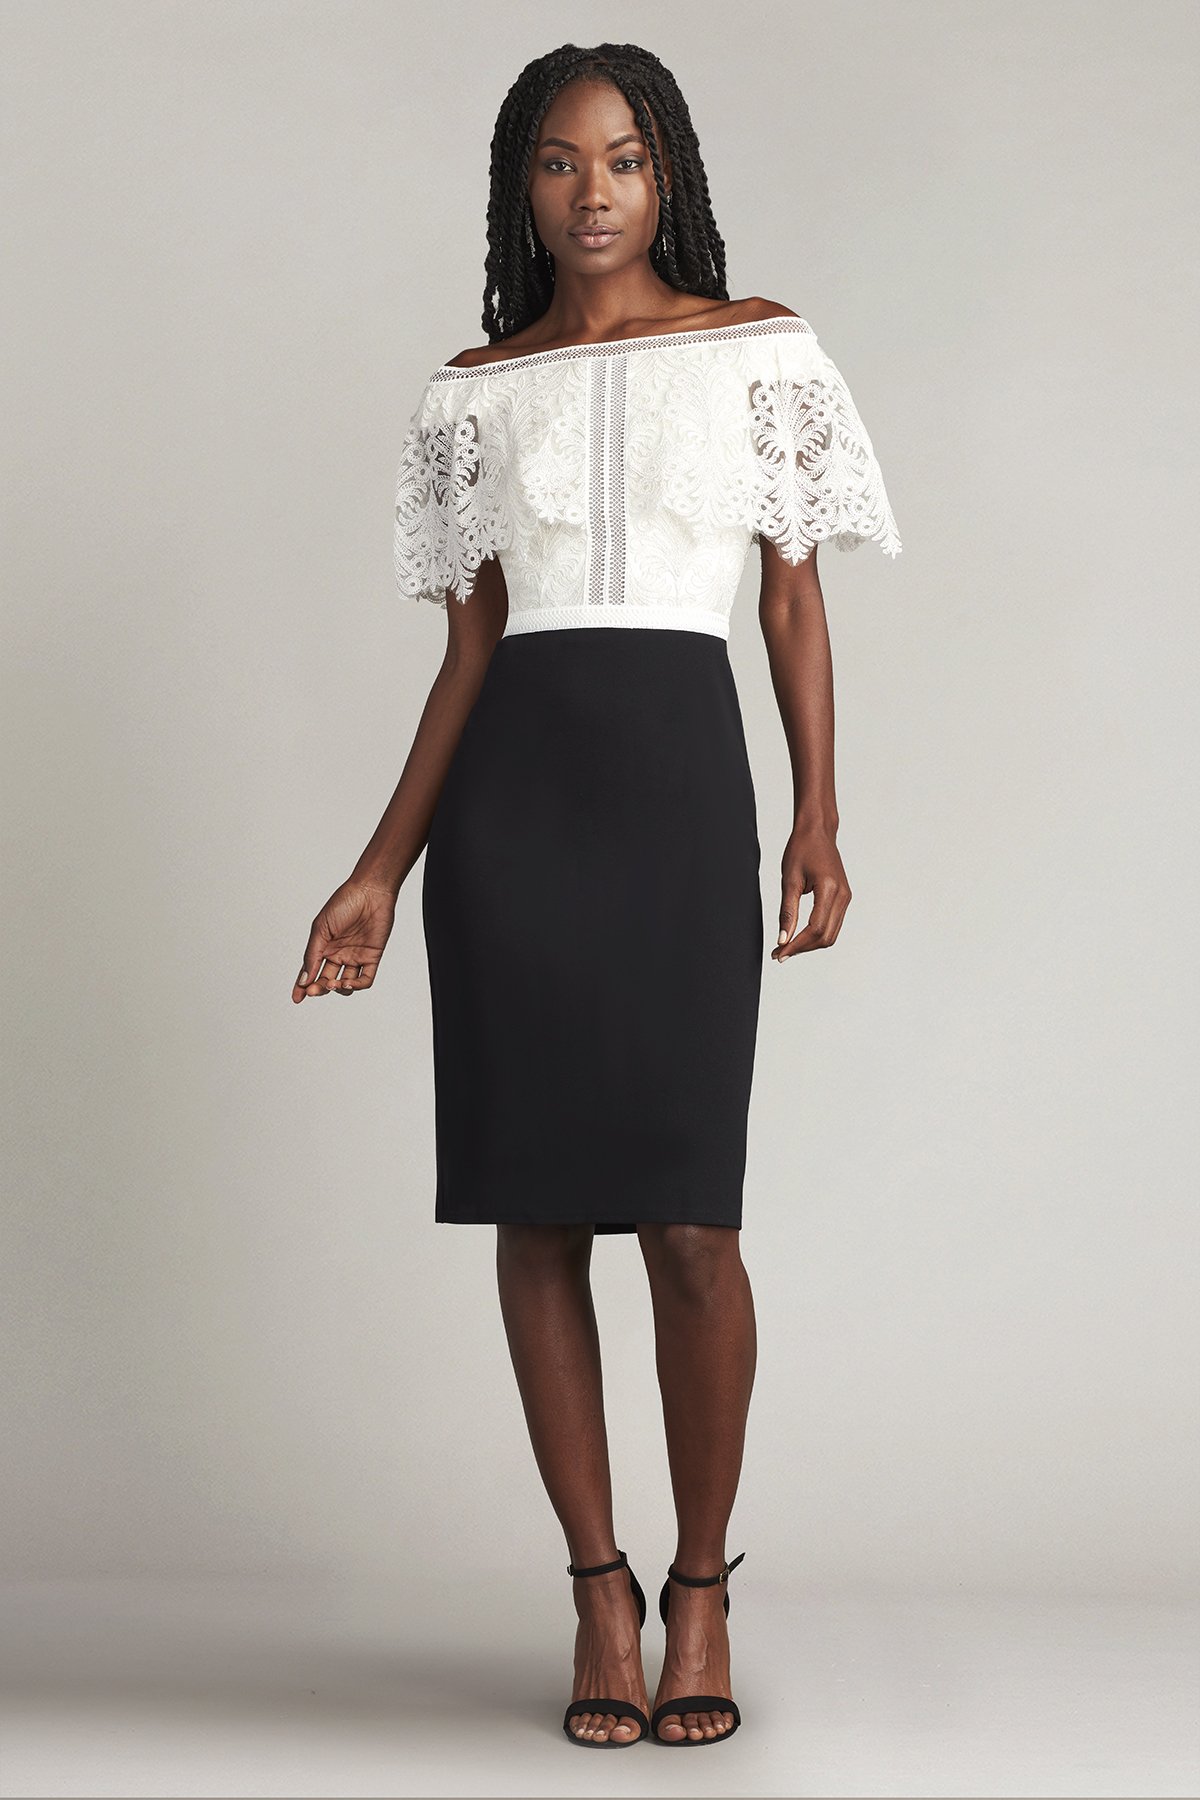 Anders Embroidered Flutter Overlay Dress